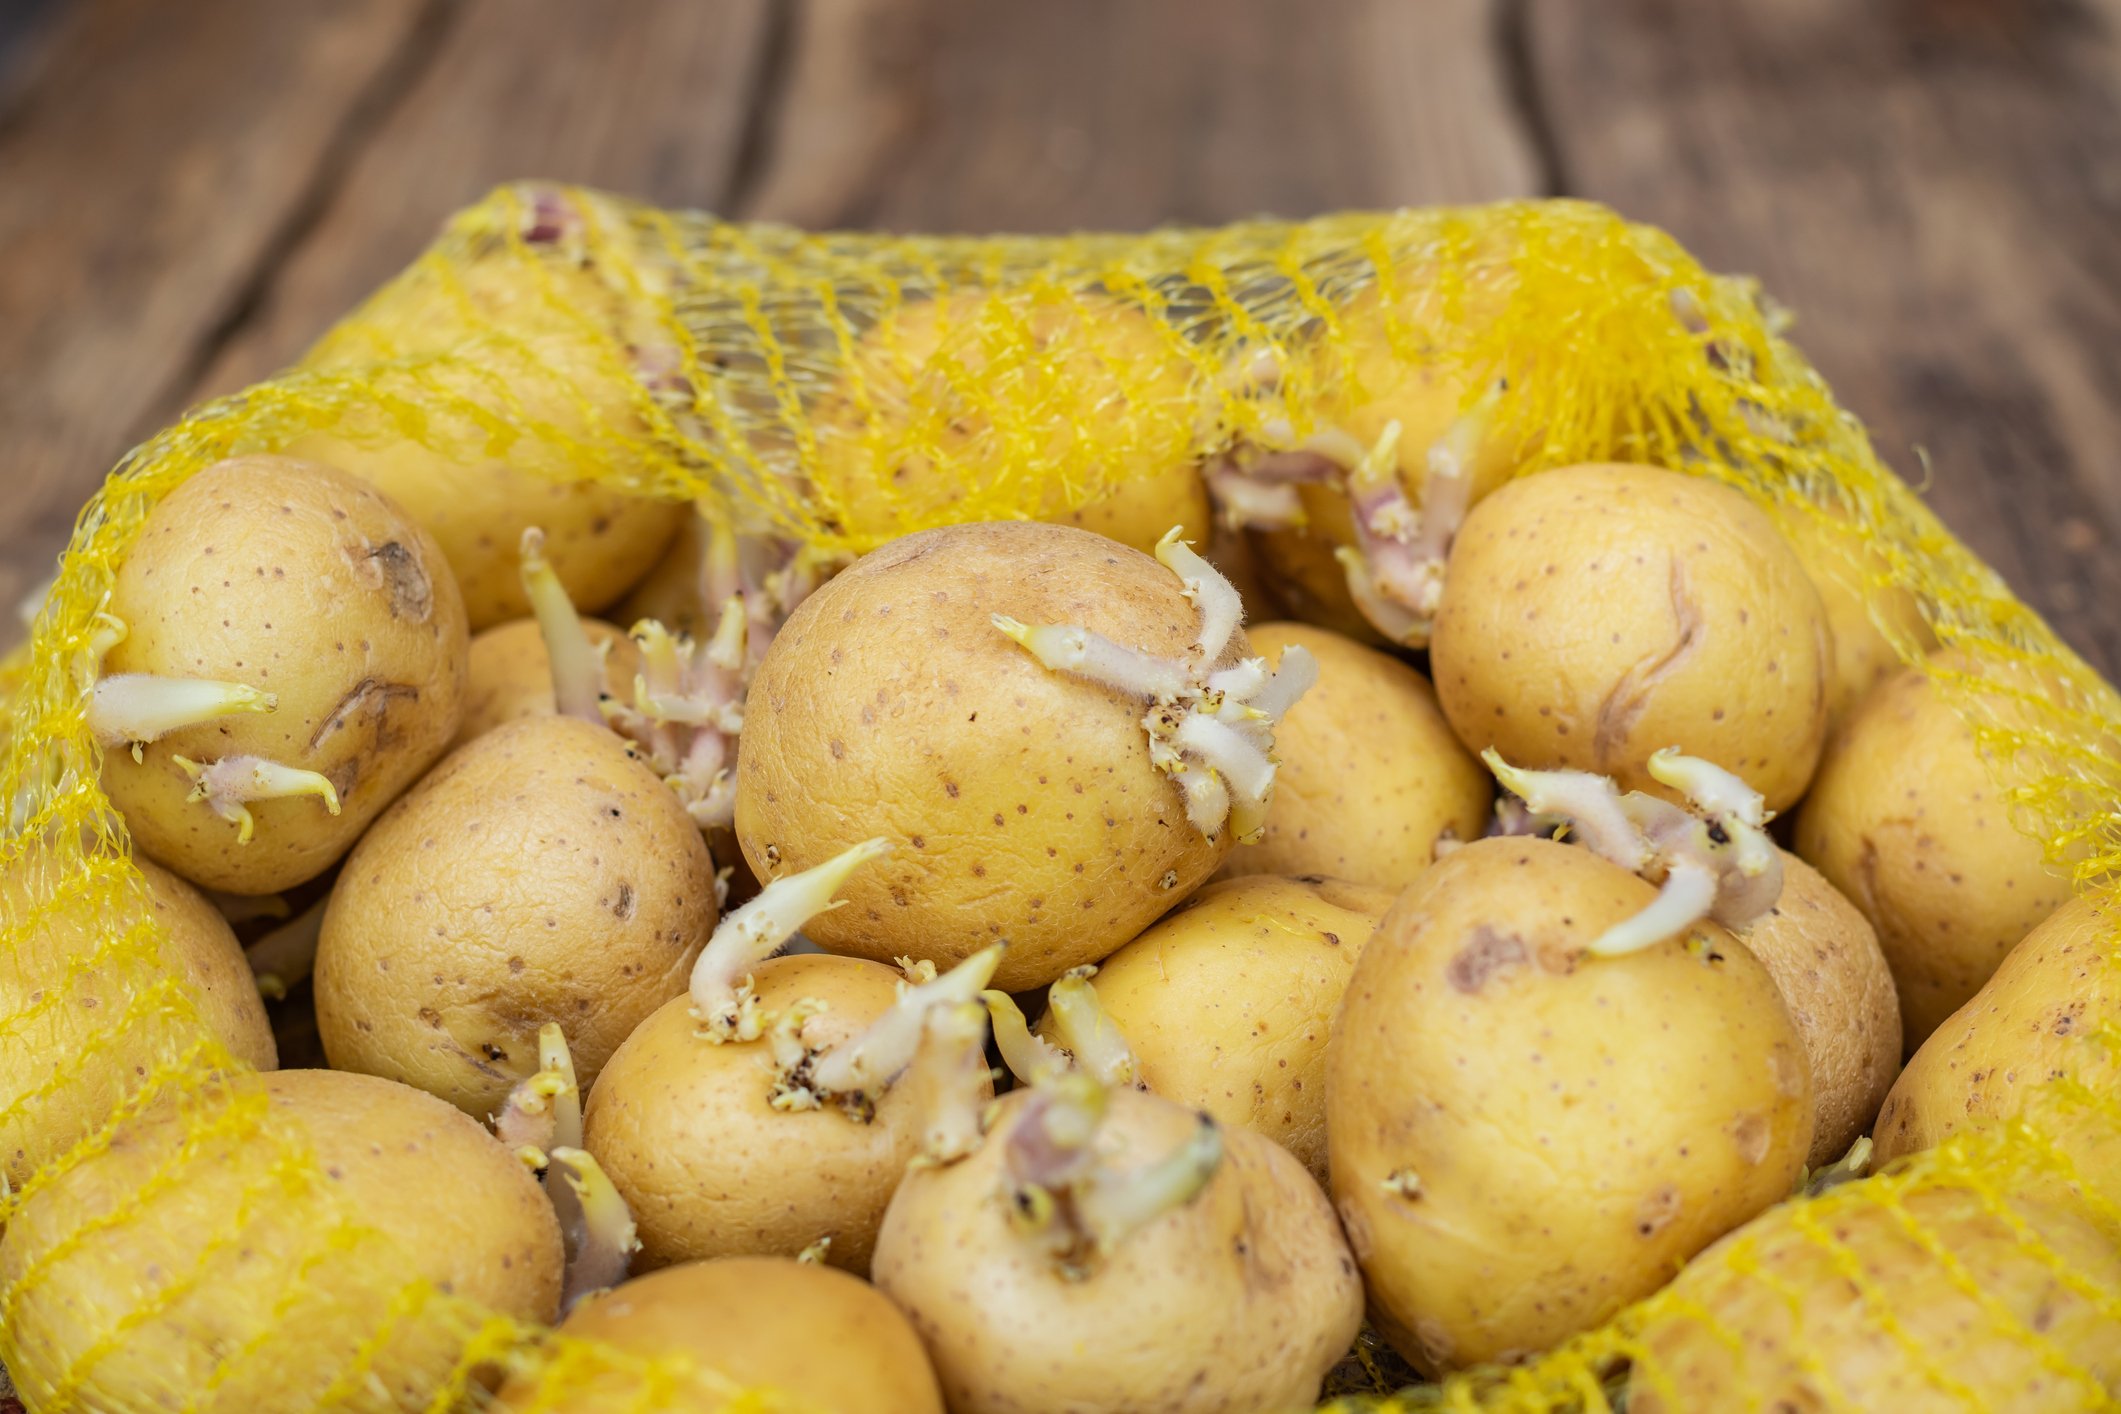 The #1 Way to Use Up Your Soft, Sprouting Potatoes - The Art of